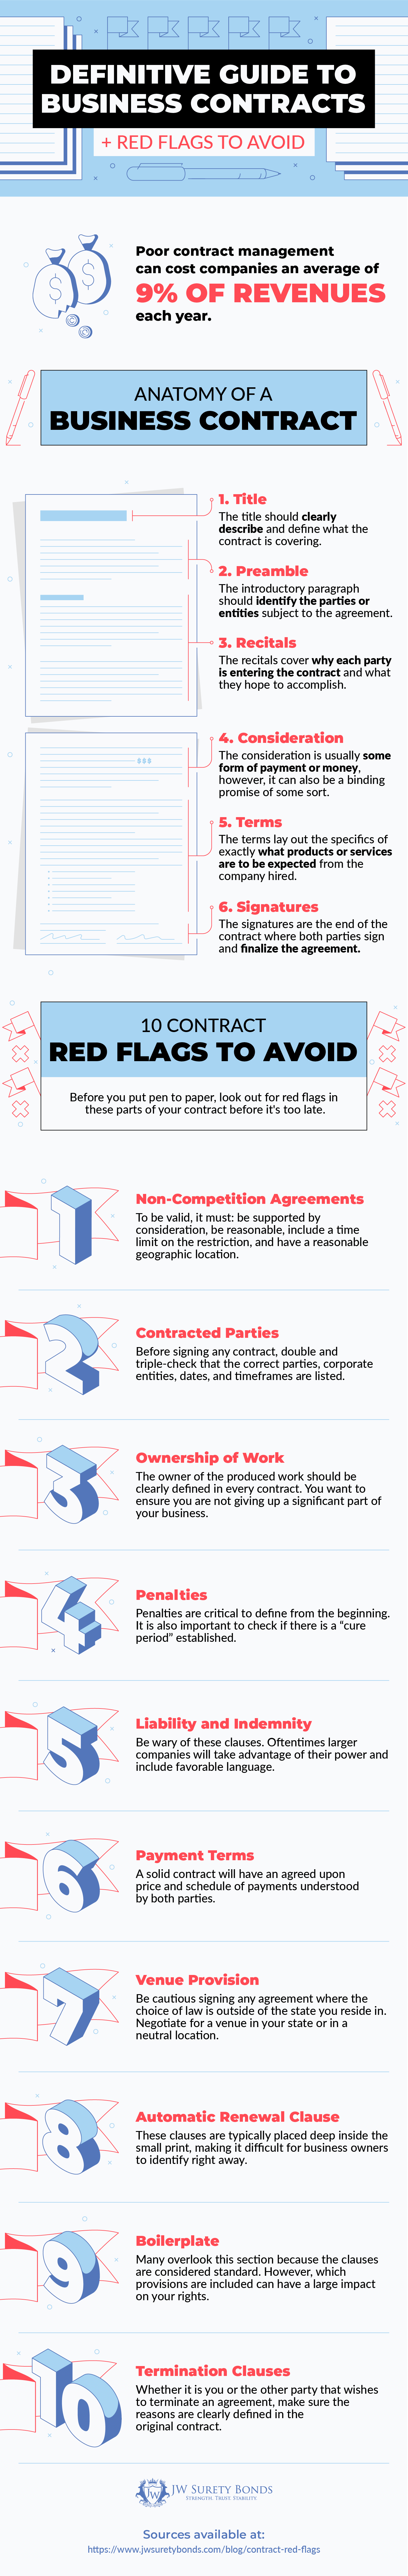 business contracts and red flags to avoid infographic